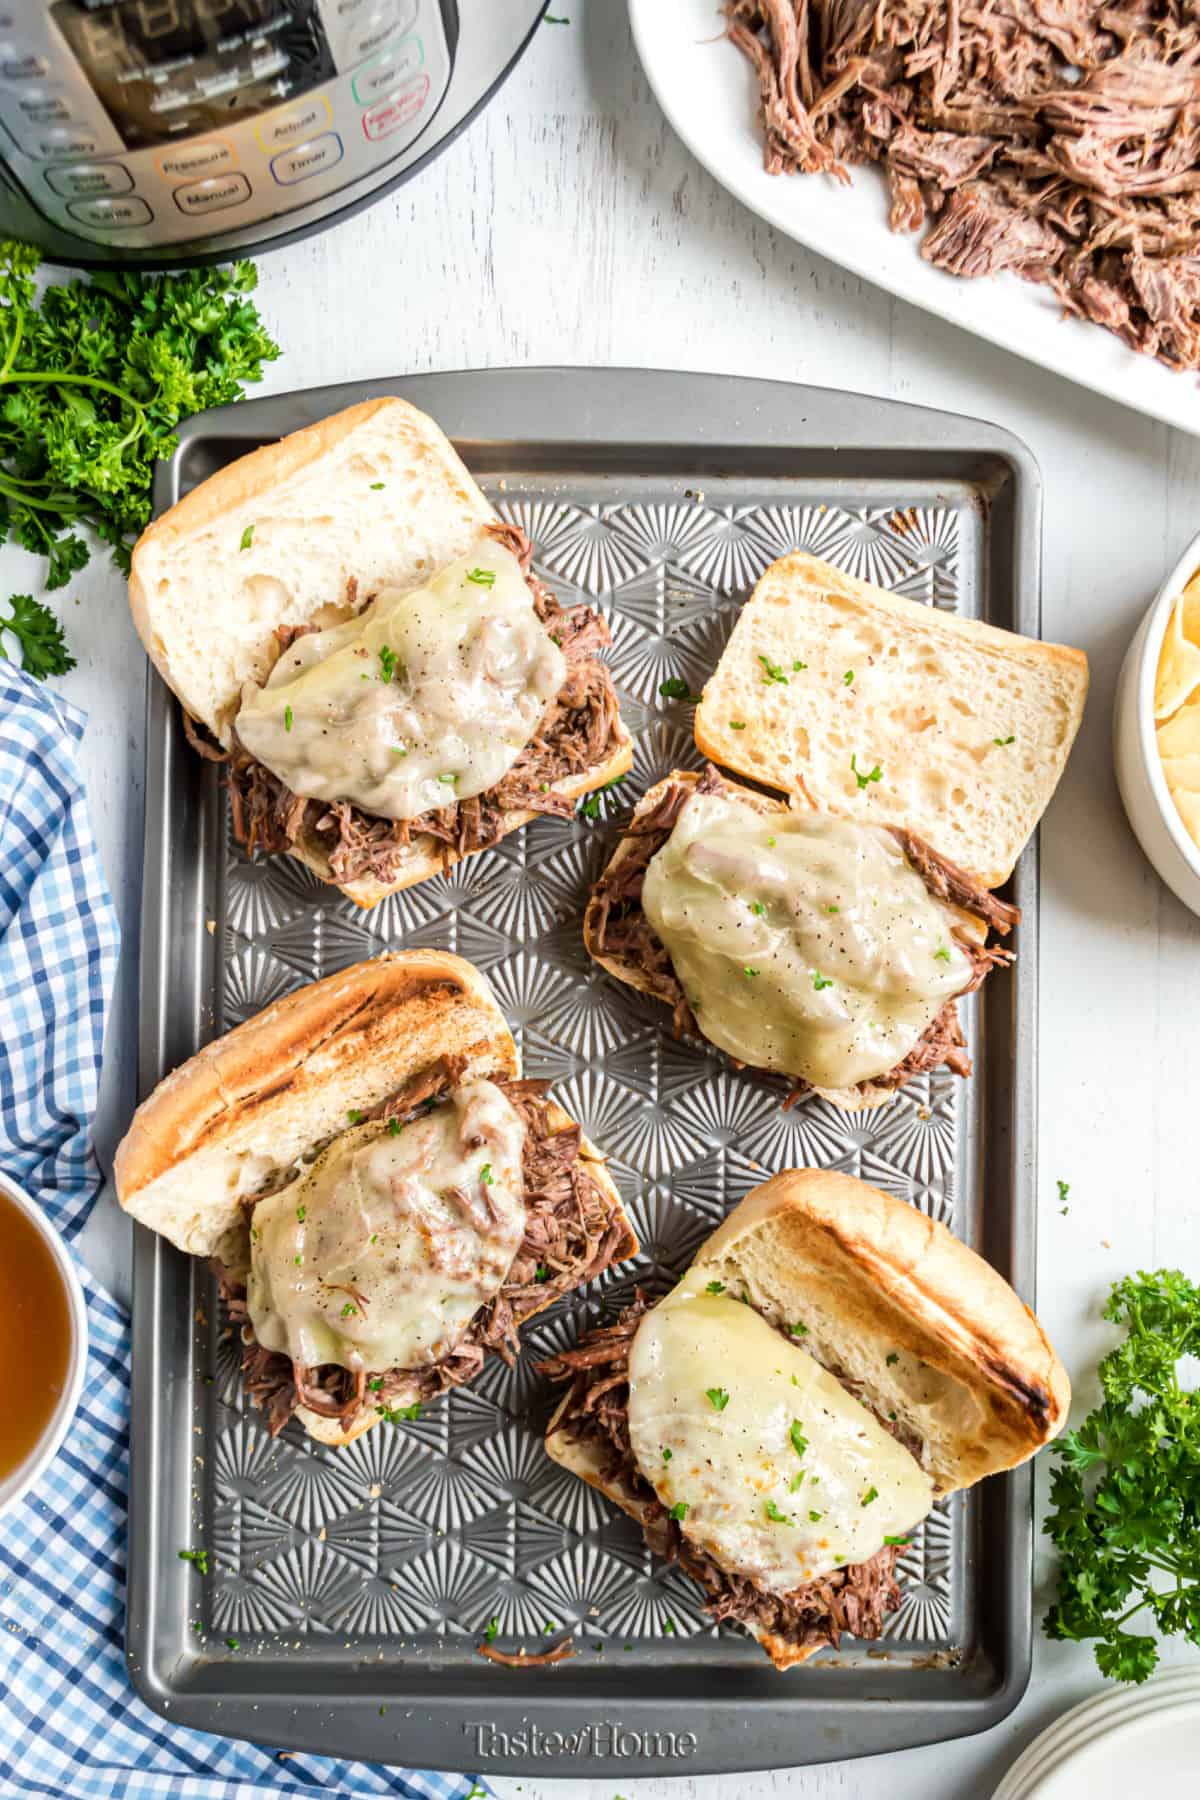 French dip sandwiches on a baking sheet to melt cheese in oven.